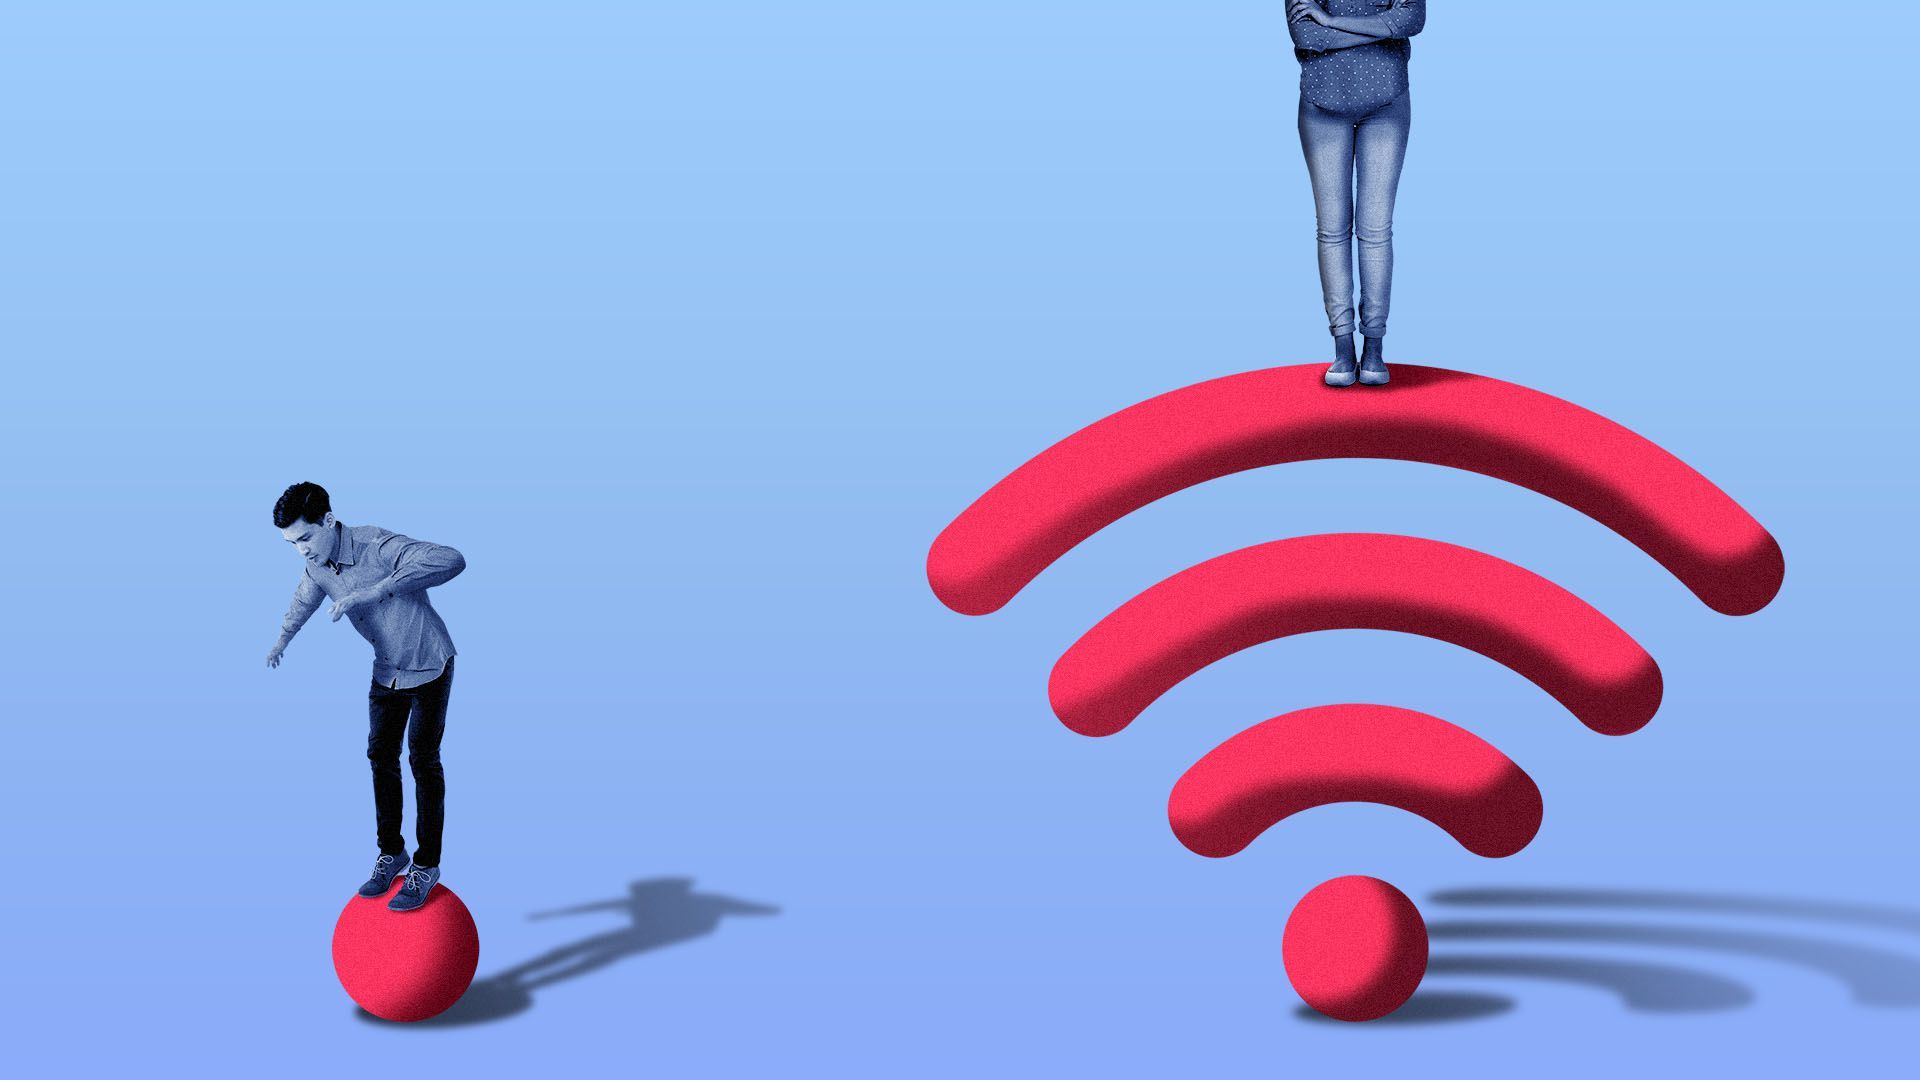 Illustration of a person standing on top of a strong wifi signal, while another tried to balance on a weak one